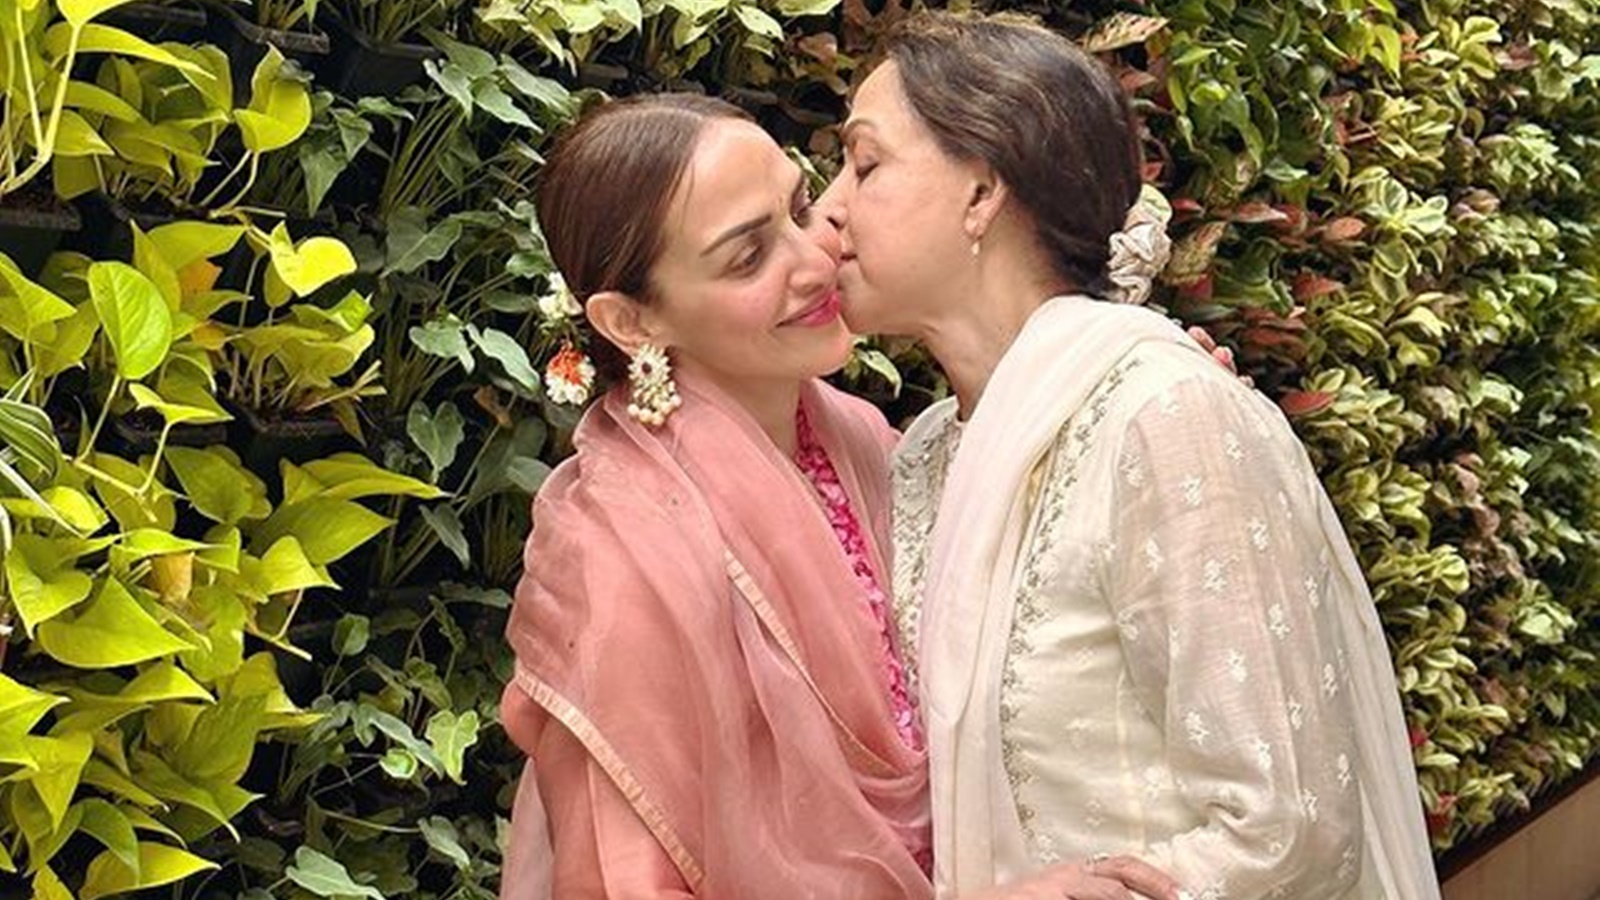 Esha Deoi Sey Xnxx - Esha Deol kisses mom Hema Malini, poses with daughters on her birthday;  brother Bobby Deol pens a special wish | Bollywood News - The Indian Express